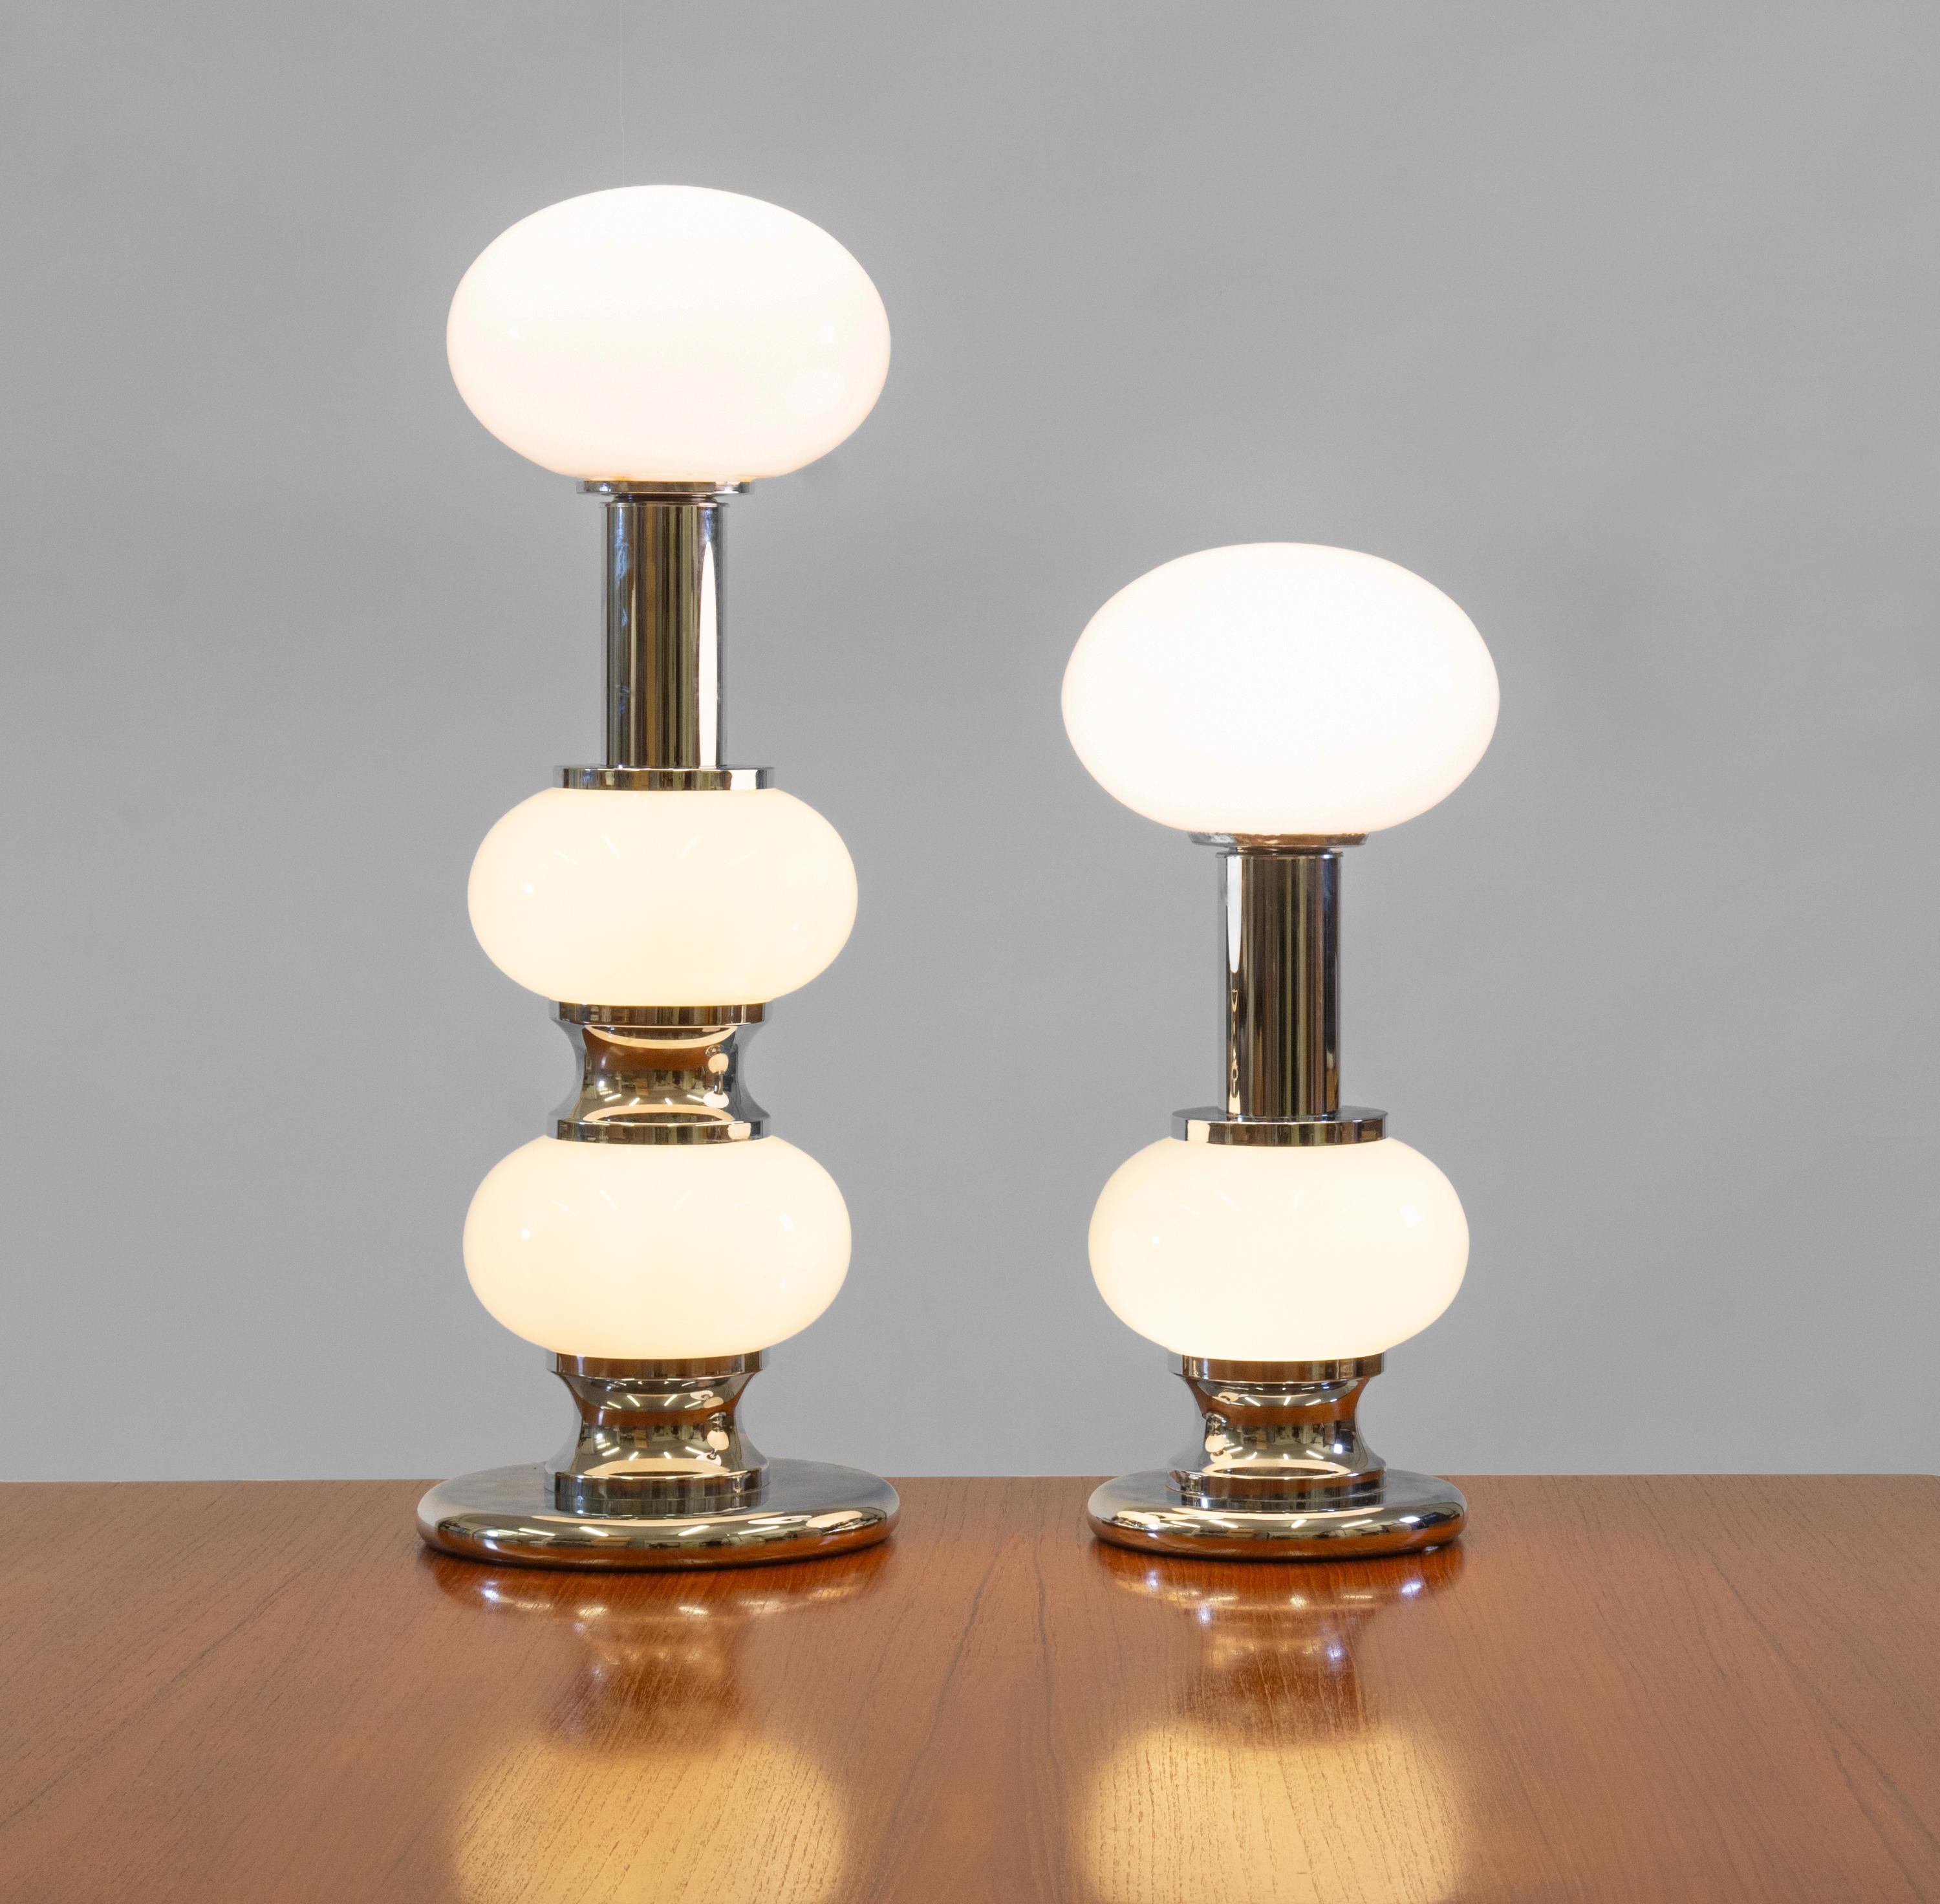 Two vintage chrome plated & opaque white glass Modernist table lamps, designed and manufactured by Sölken Leuchten in Germany during the 1970s. Part label to one.

Delivery included to the mainland UK.

The lamps have later opaque glass shades with